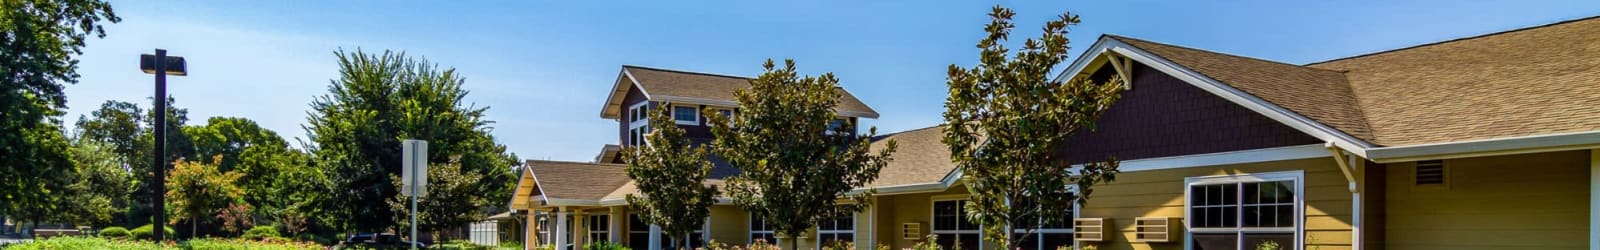 More information for Amber Grove Place in Chico, California. 